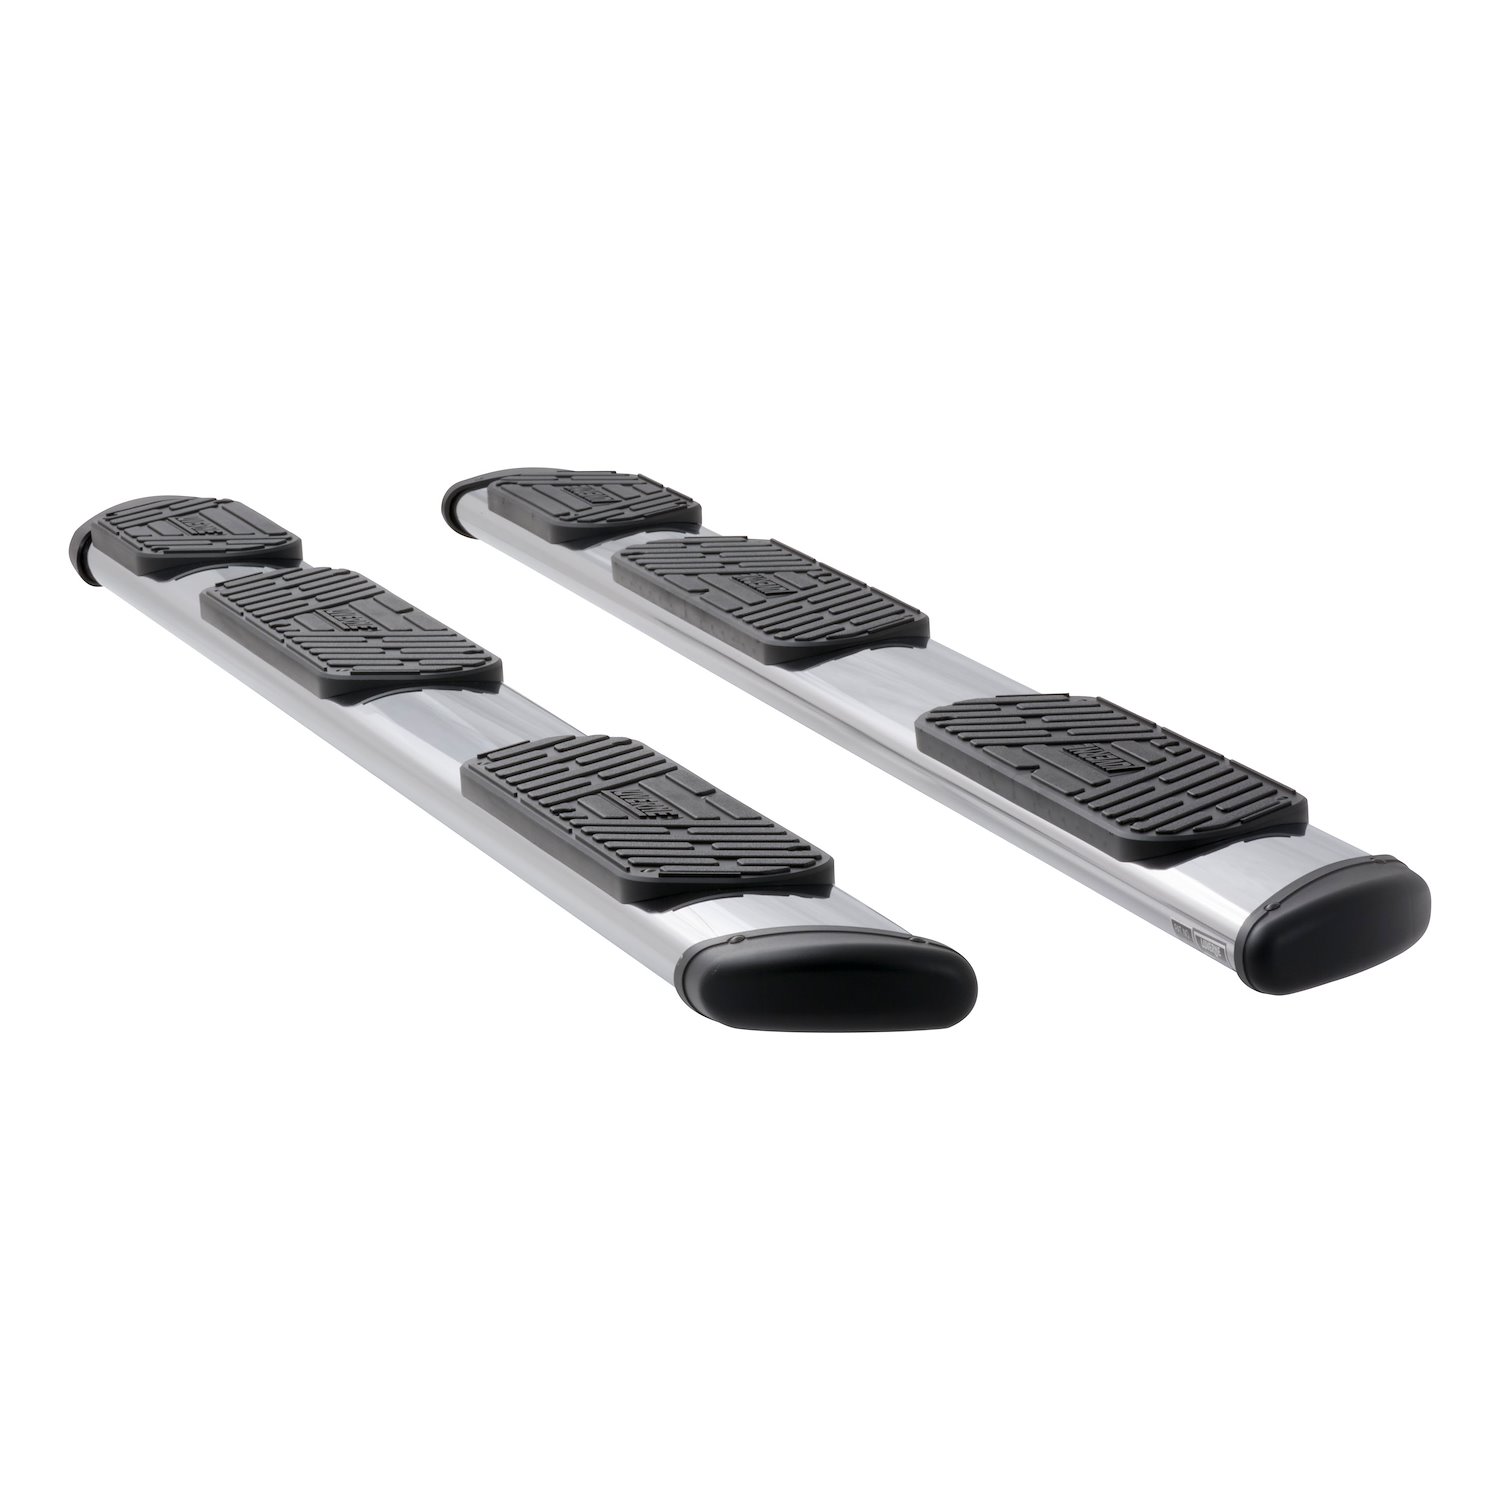 477102-400939 Regal 7 Polished Stainless 102 in. Oval W2W Steps Fits Select Dodge, Ram 1500